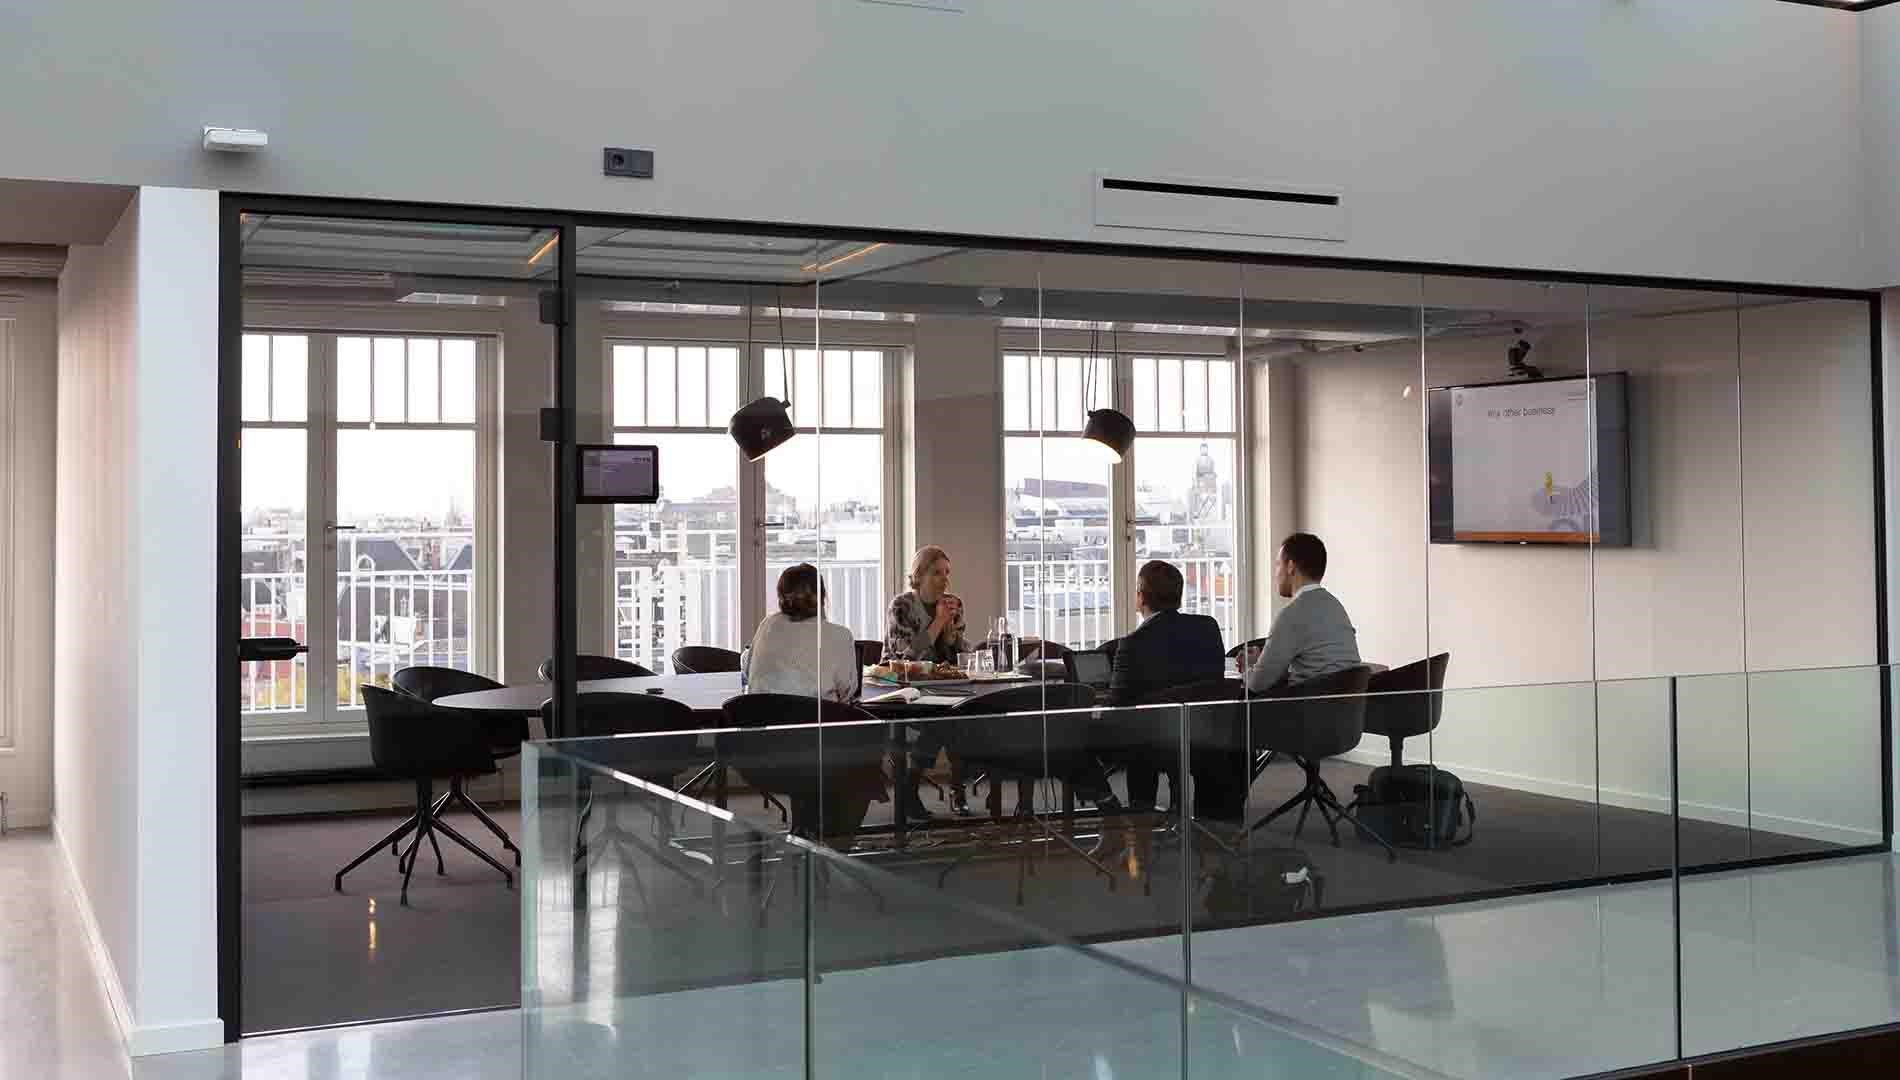 An image of 4 people in a meeting in an office